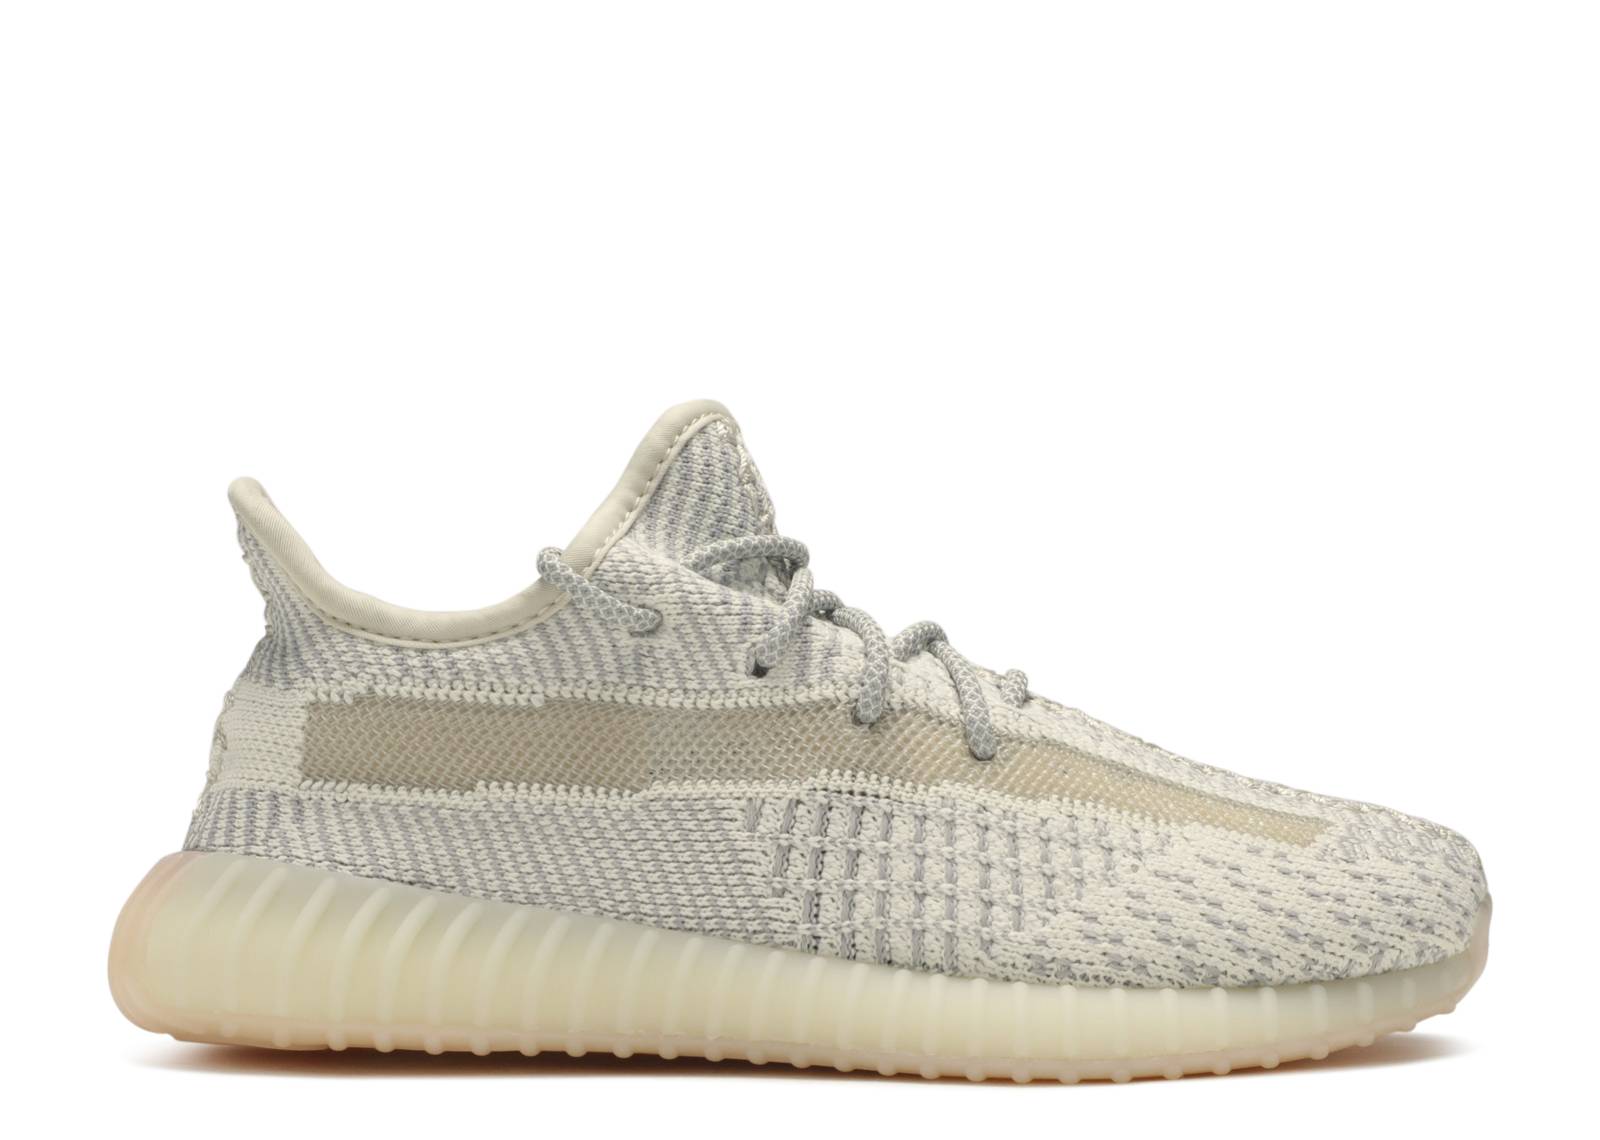 Yeezy Boost 350 V2 Kids 'Lundmark Non-Reflective'Color:Cream,Size:10.5